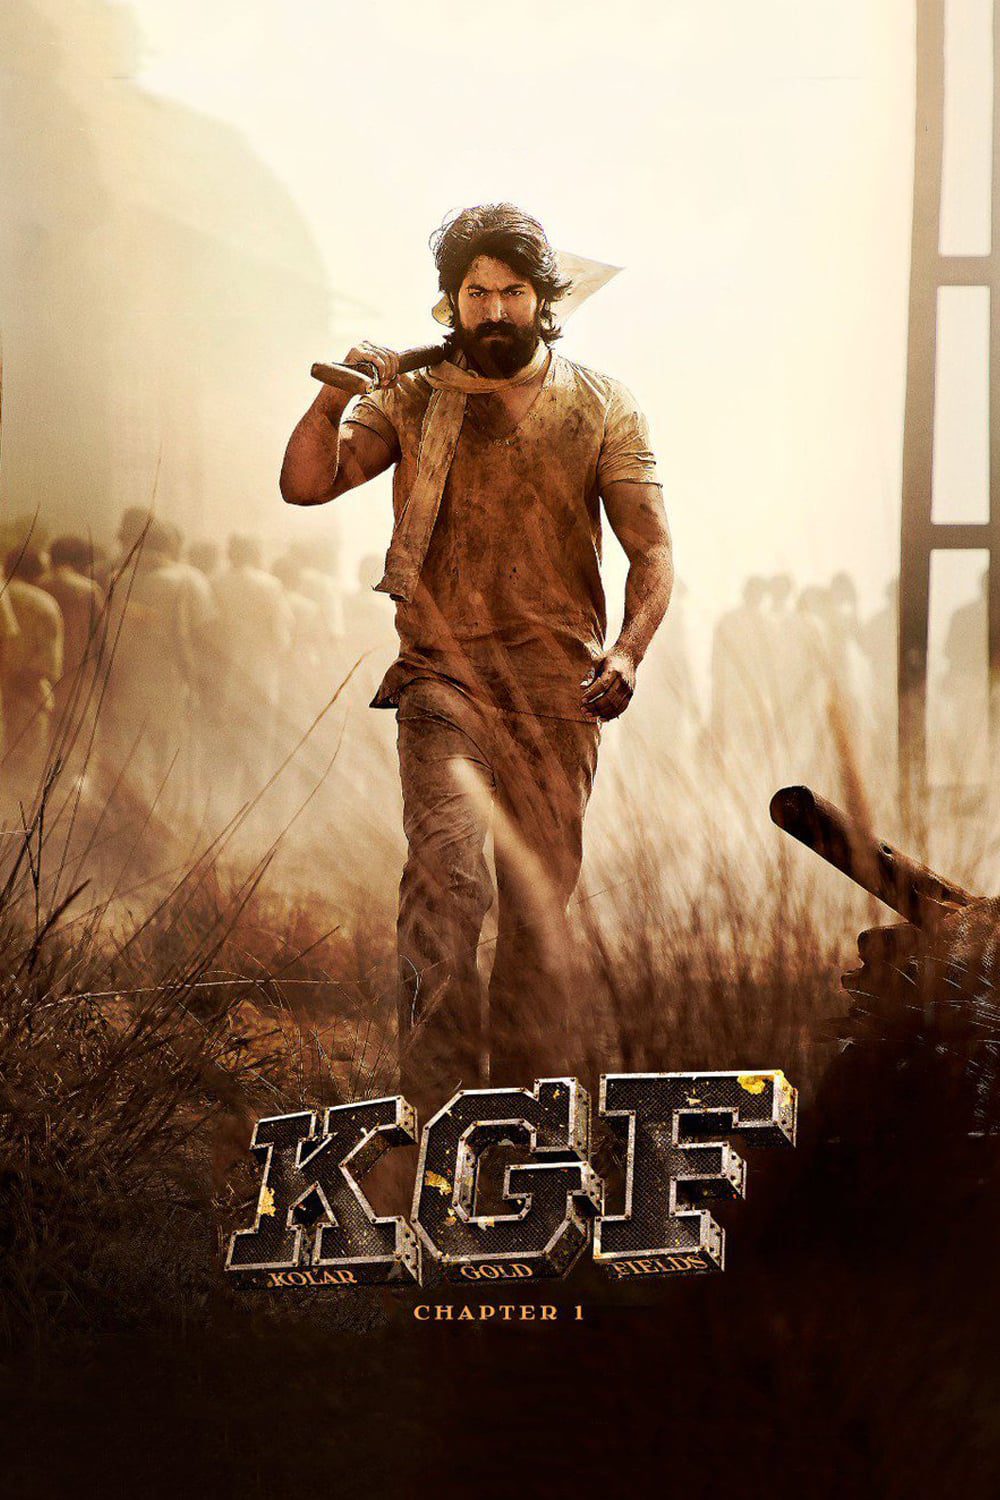 Poster for the movie "K.G.F: Chapter 1"